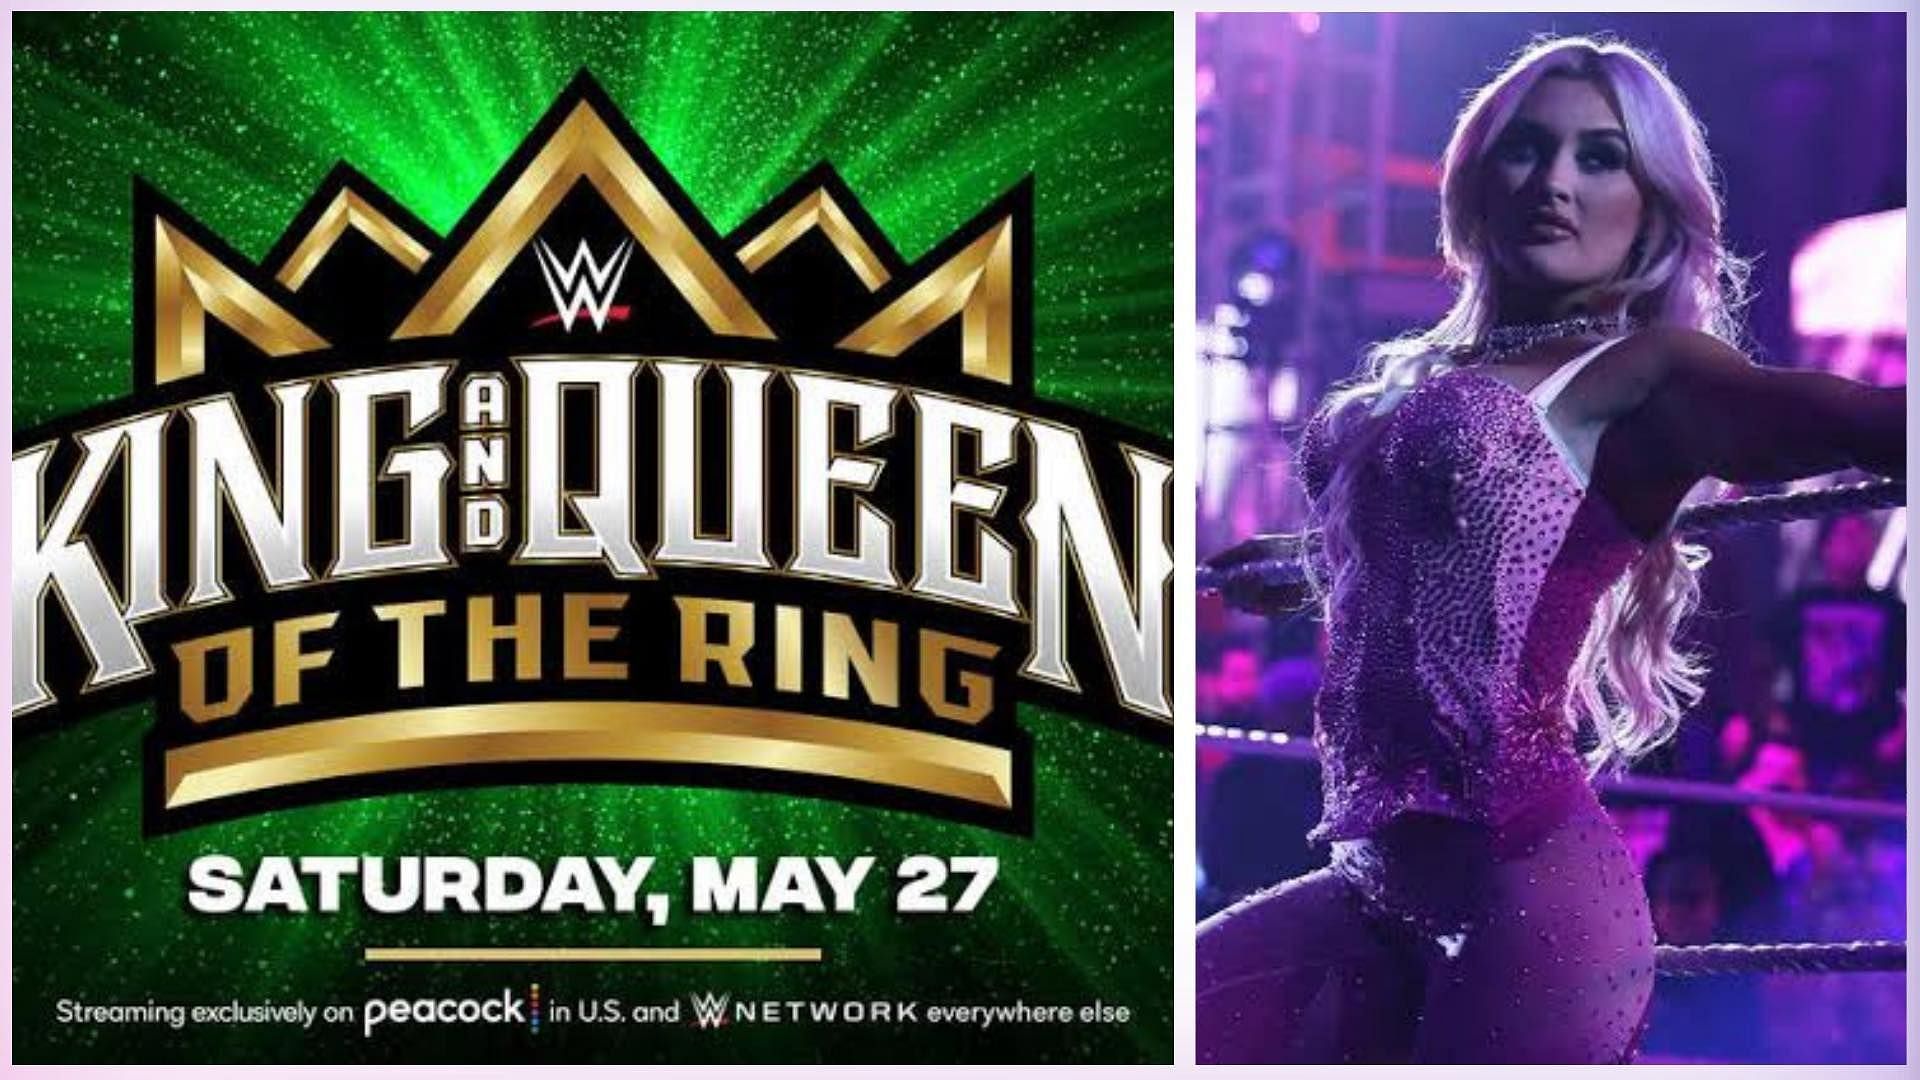 The Queen Of The Ring Tournament is returning to WWE programming